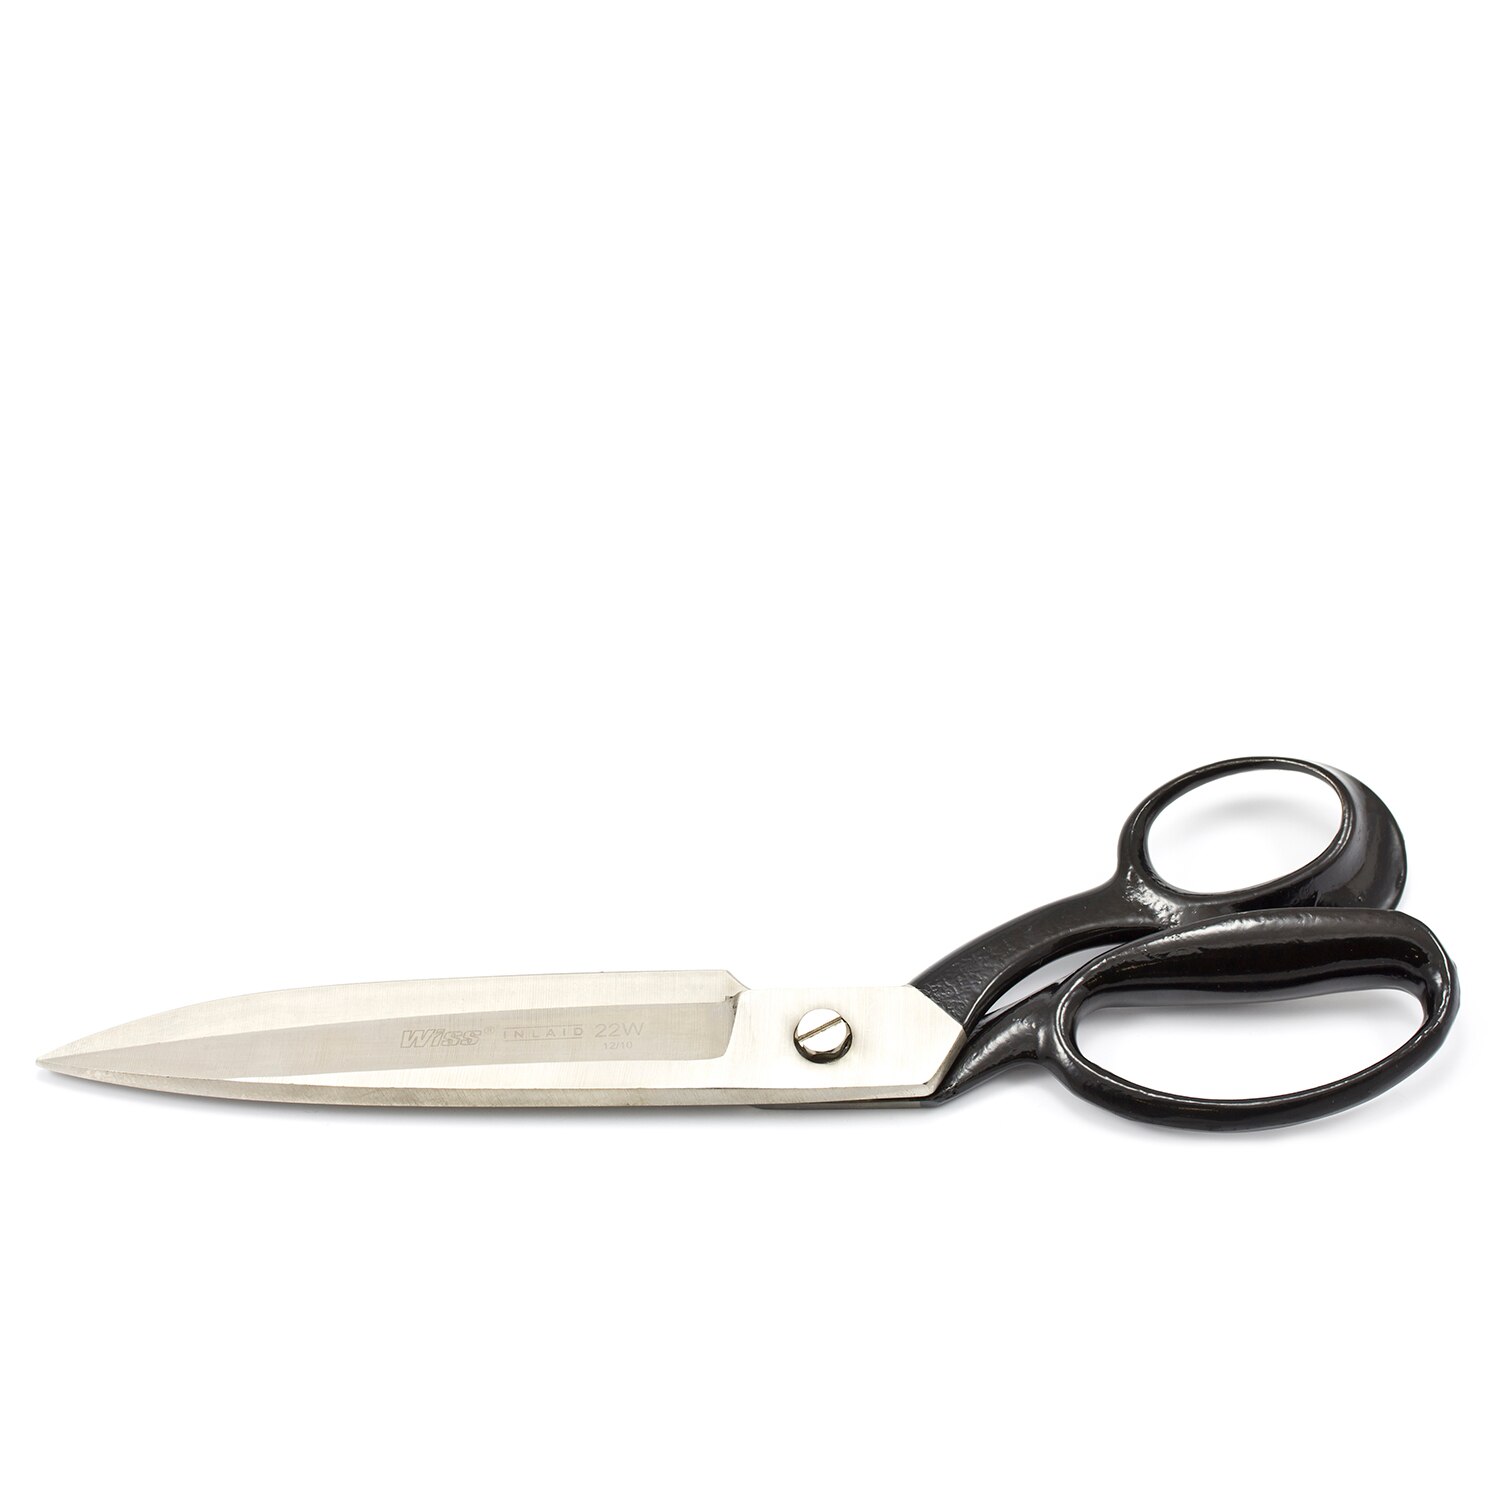 Buy Wiss® Heavy Duty Upholstery, Carpet and Fabric Shears #22W 12-1/4 inch